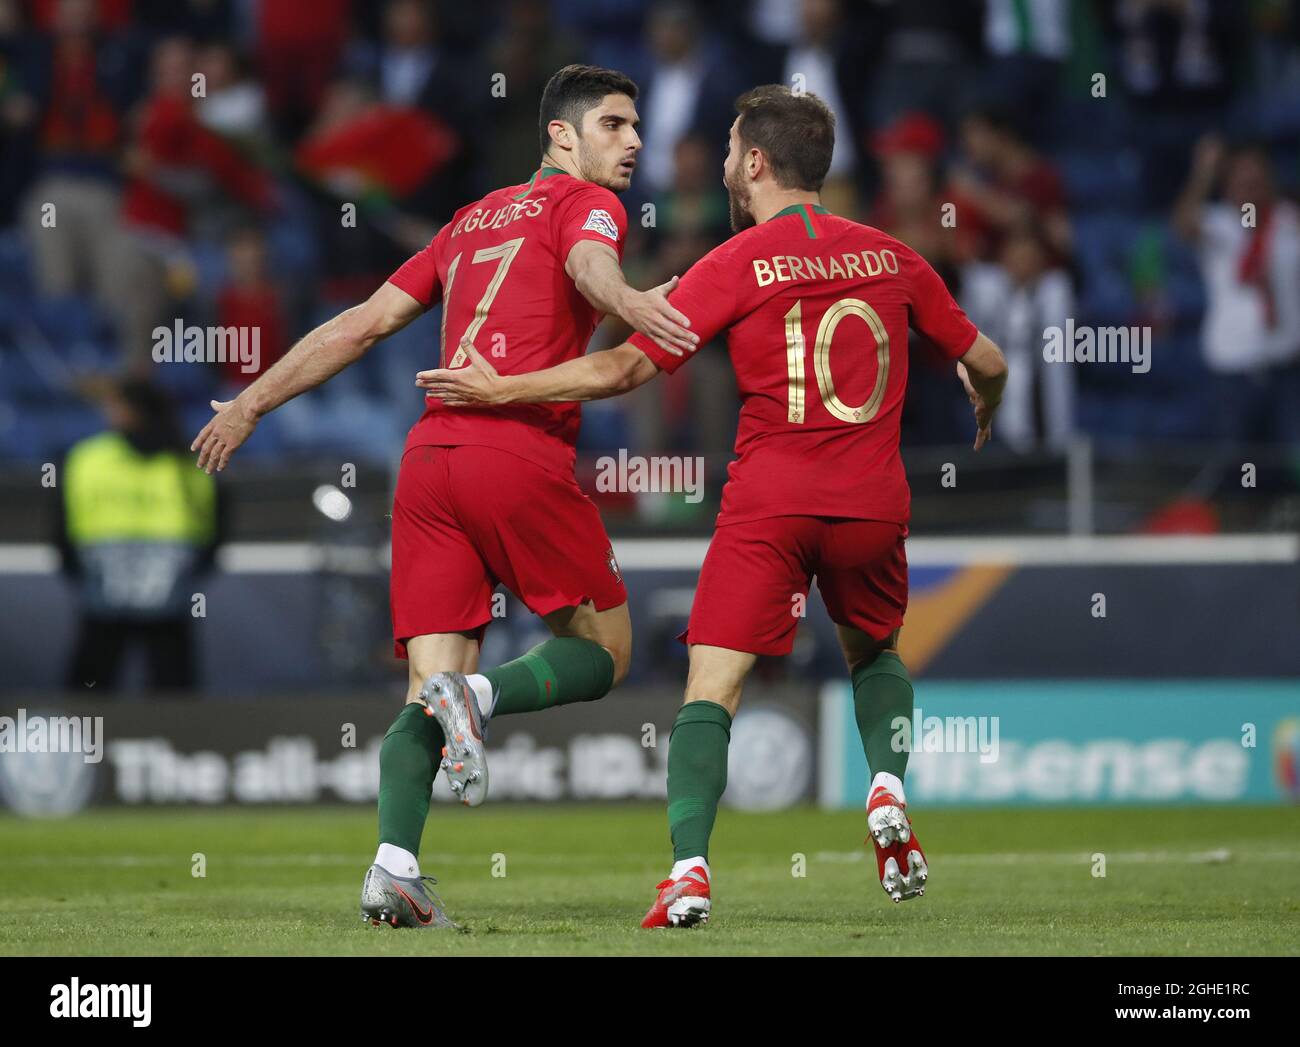 Goncalo Guedes of Portugal (L) turns to celebrate scoring the first goal with Bernardo Silva of Portugal during the UEFA Nations League match at the Estadio do Dragao, Porto. Picture date: 9th June 2019. Picture credit should read: David Klein/Sportimage via PA Images Stock Photo